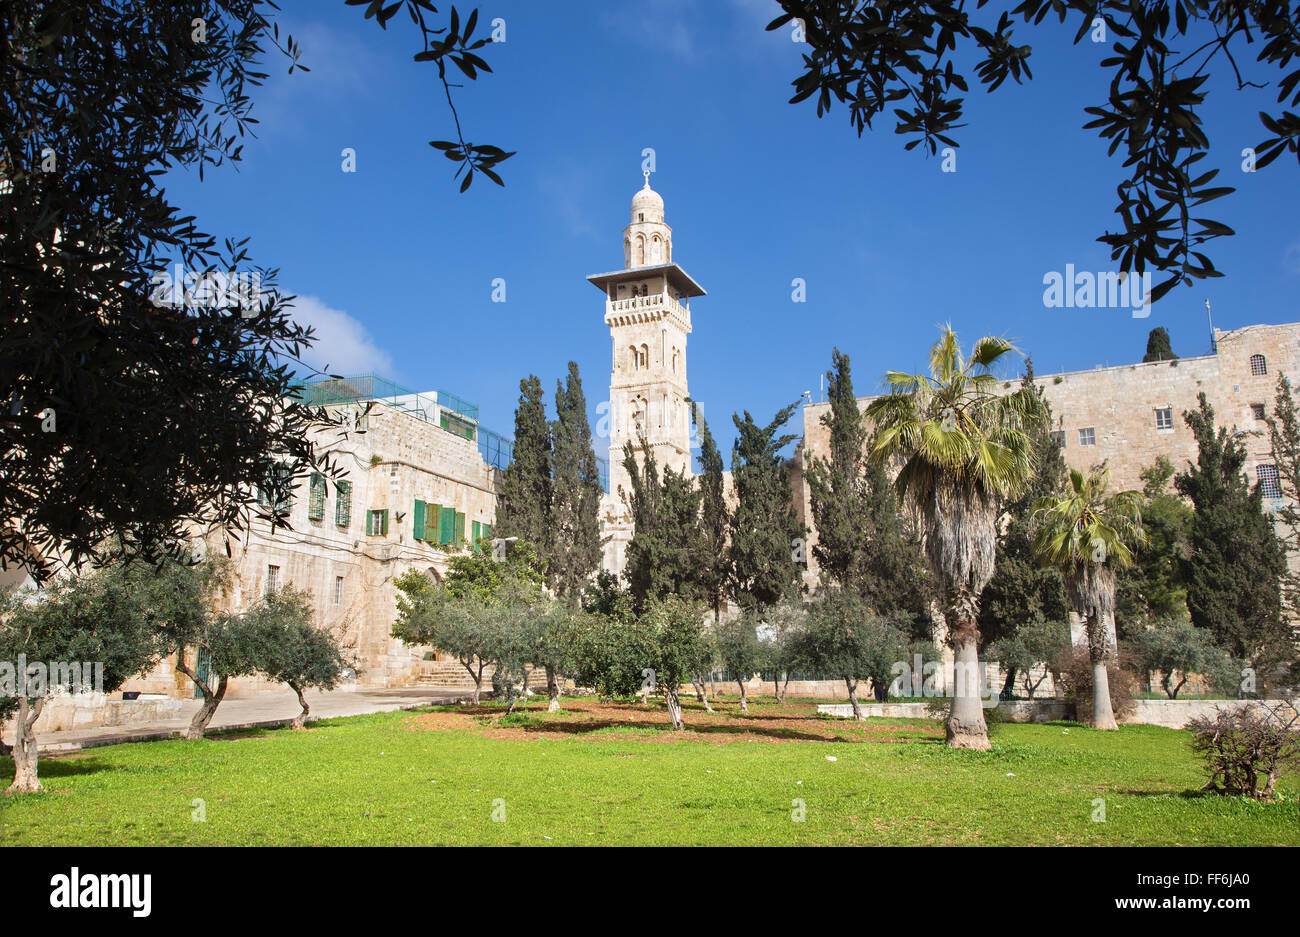 JERUSALEM, ISRAEL - MARCH 5, 2015: The look from the Temple Mount to minaret in the north part. Stock Photo